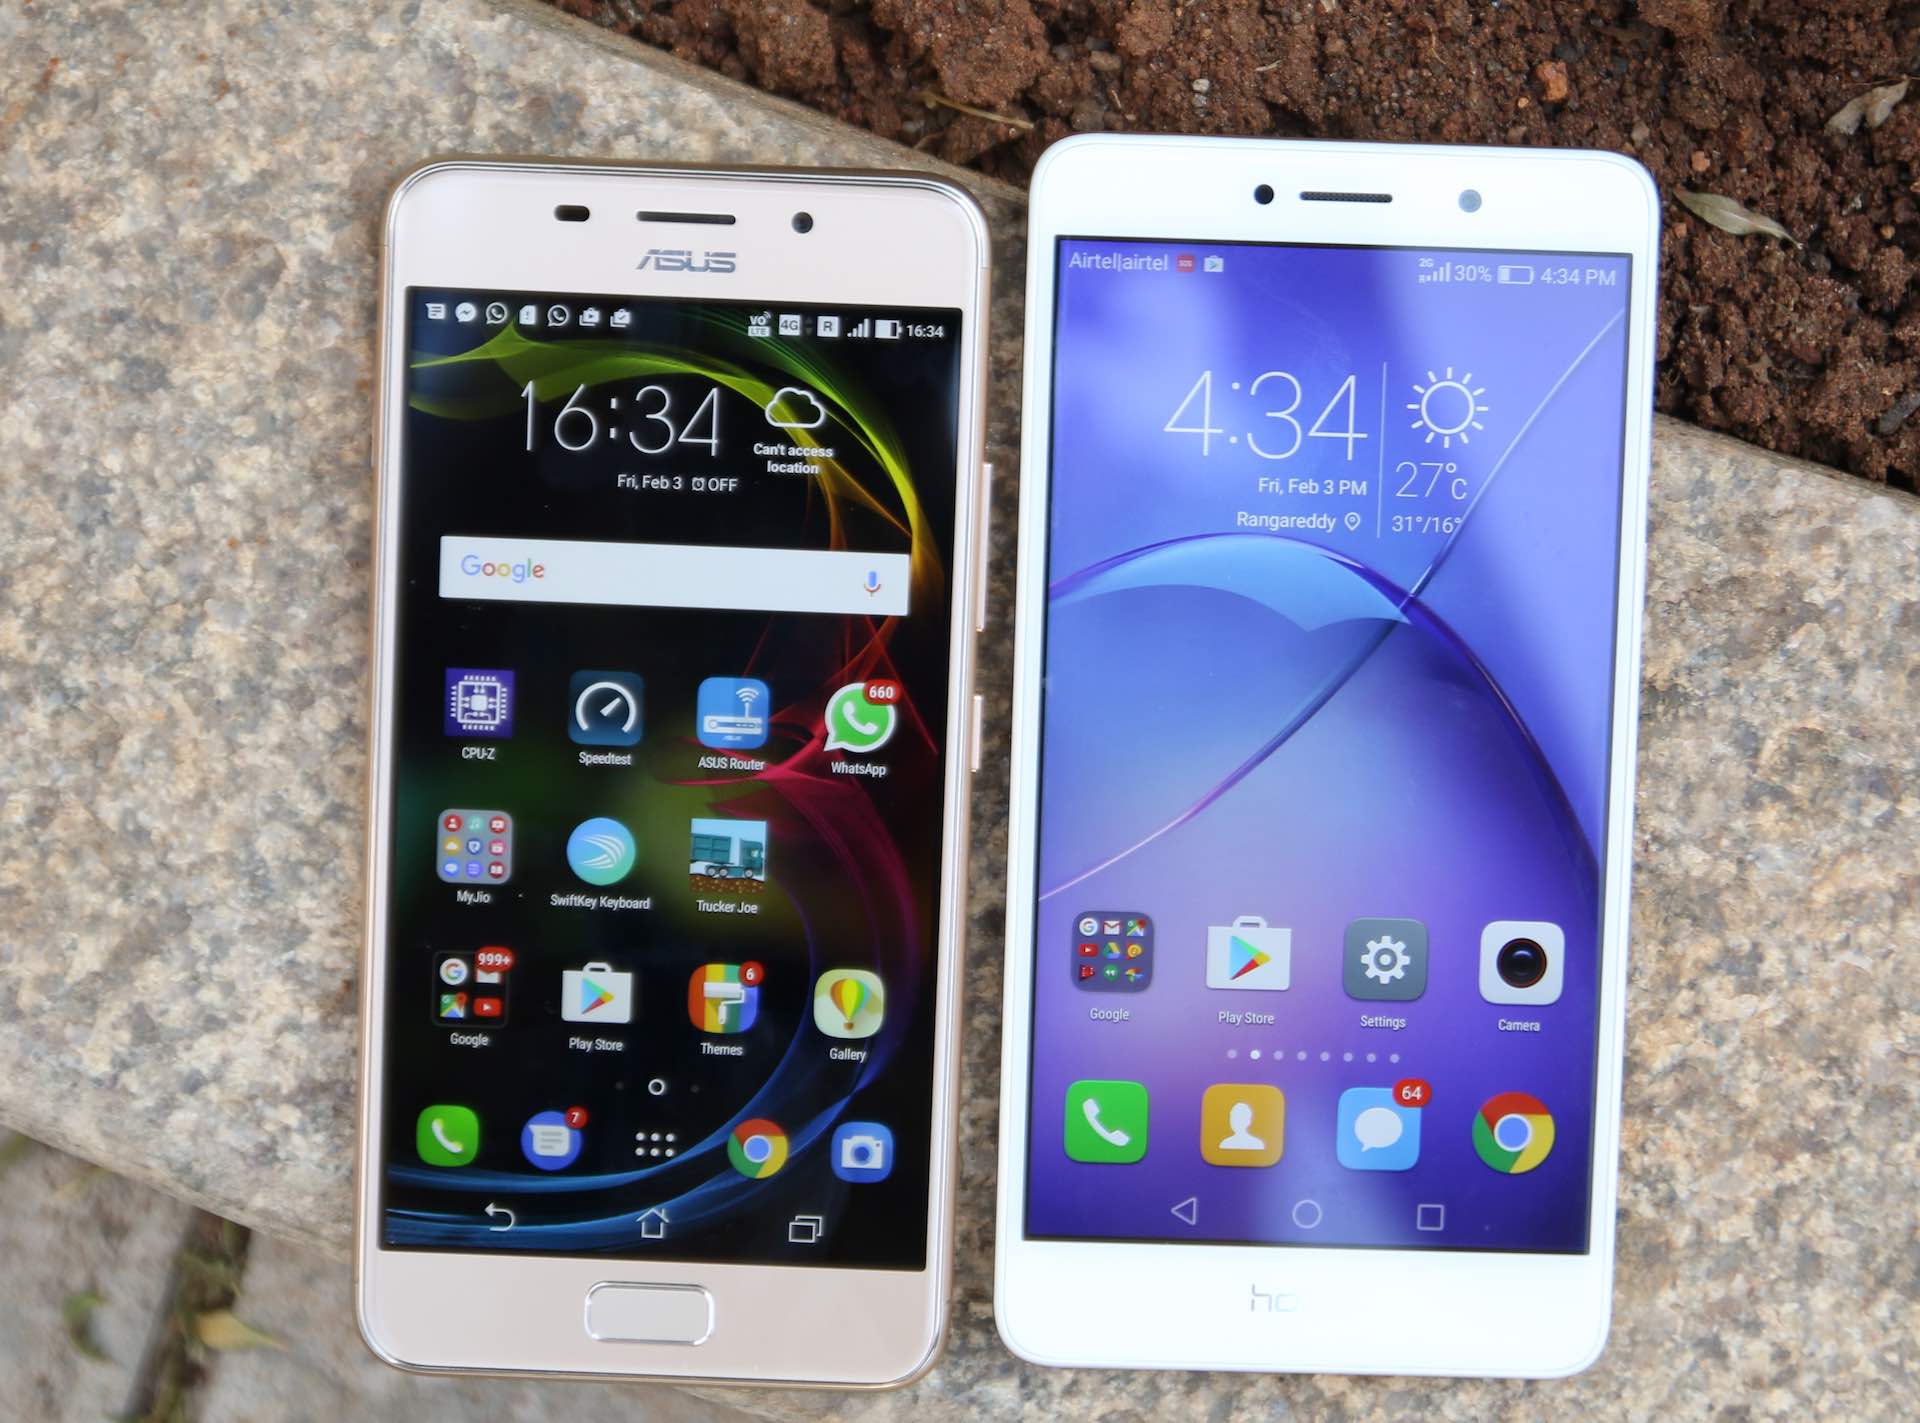 The Honor 6X is an awesome phone. But, the competition is stiff. The ASUS Zenfone 3s being one 